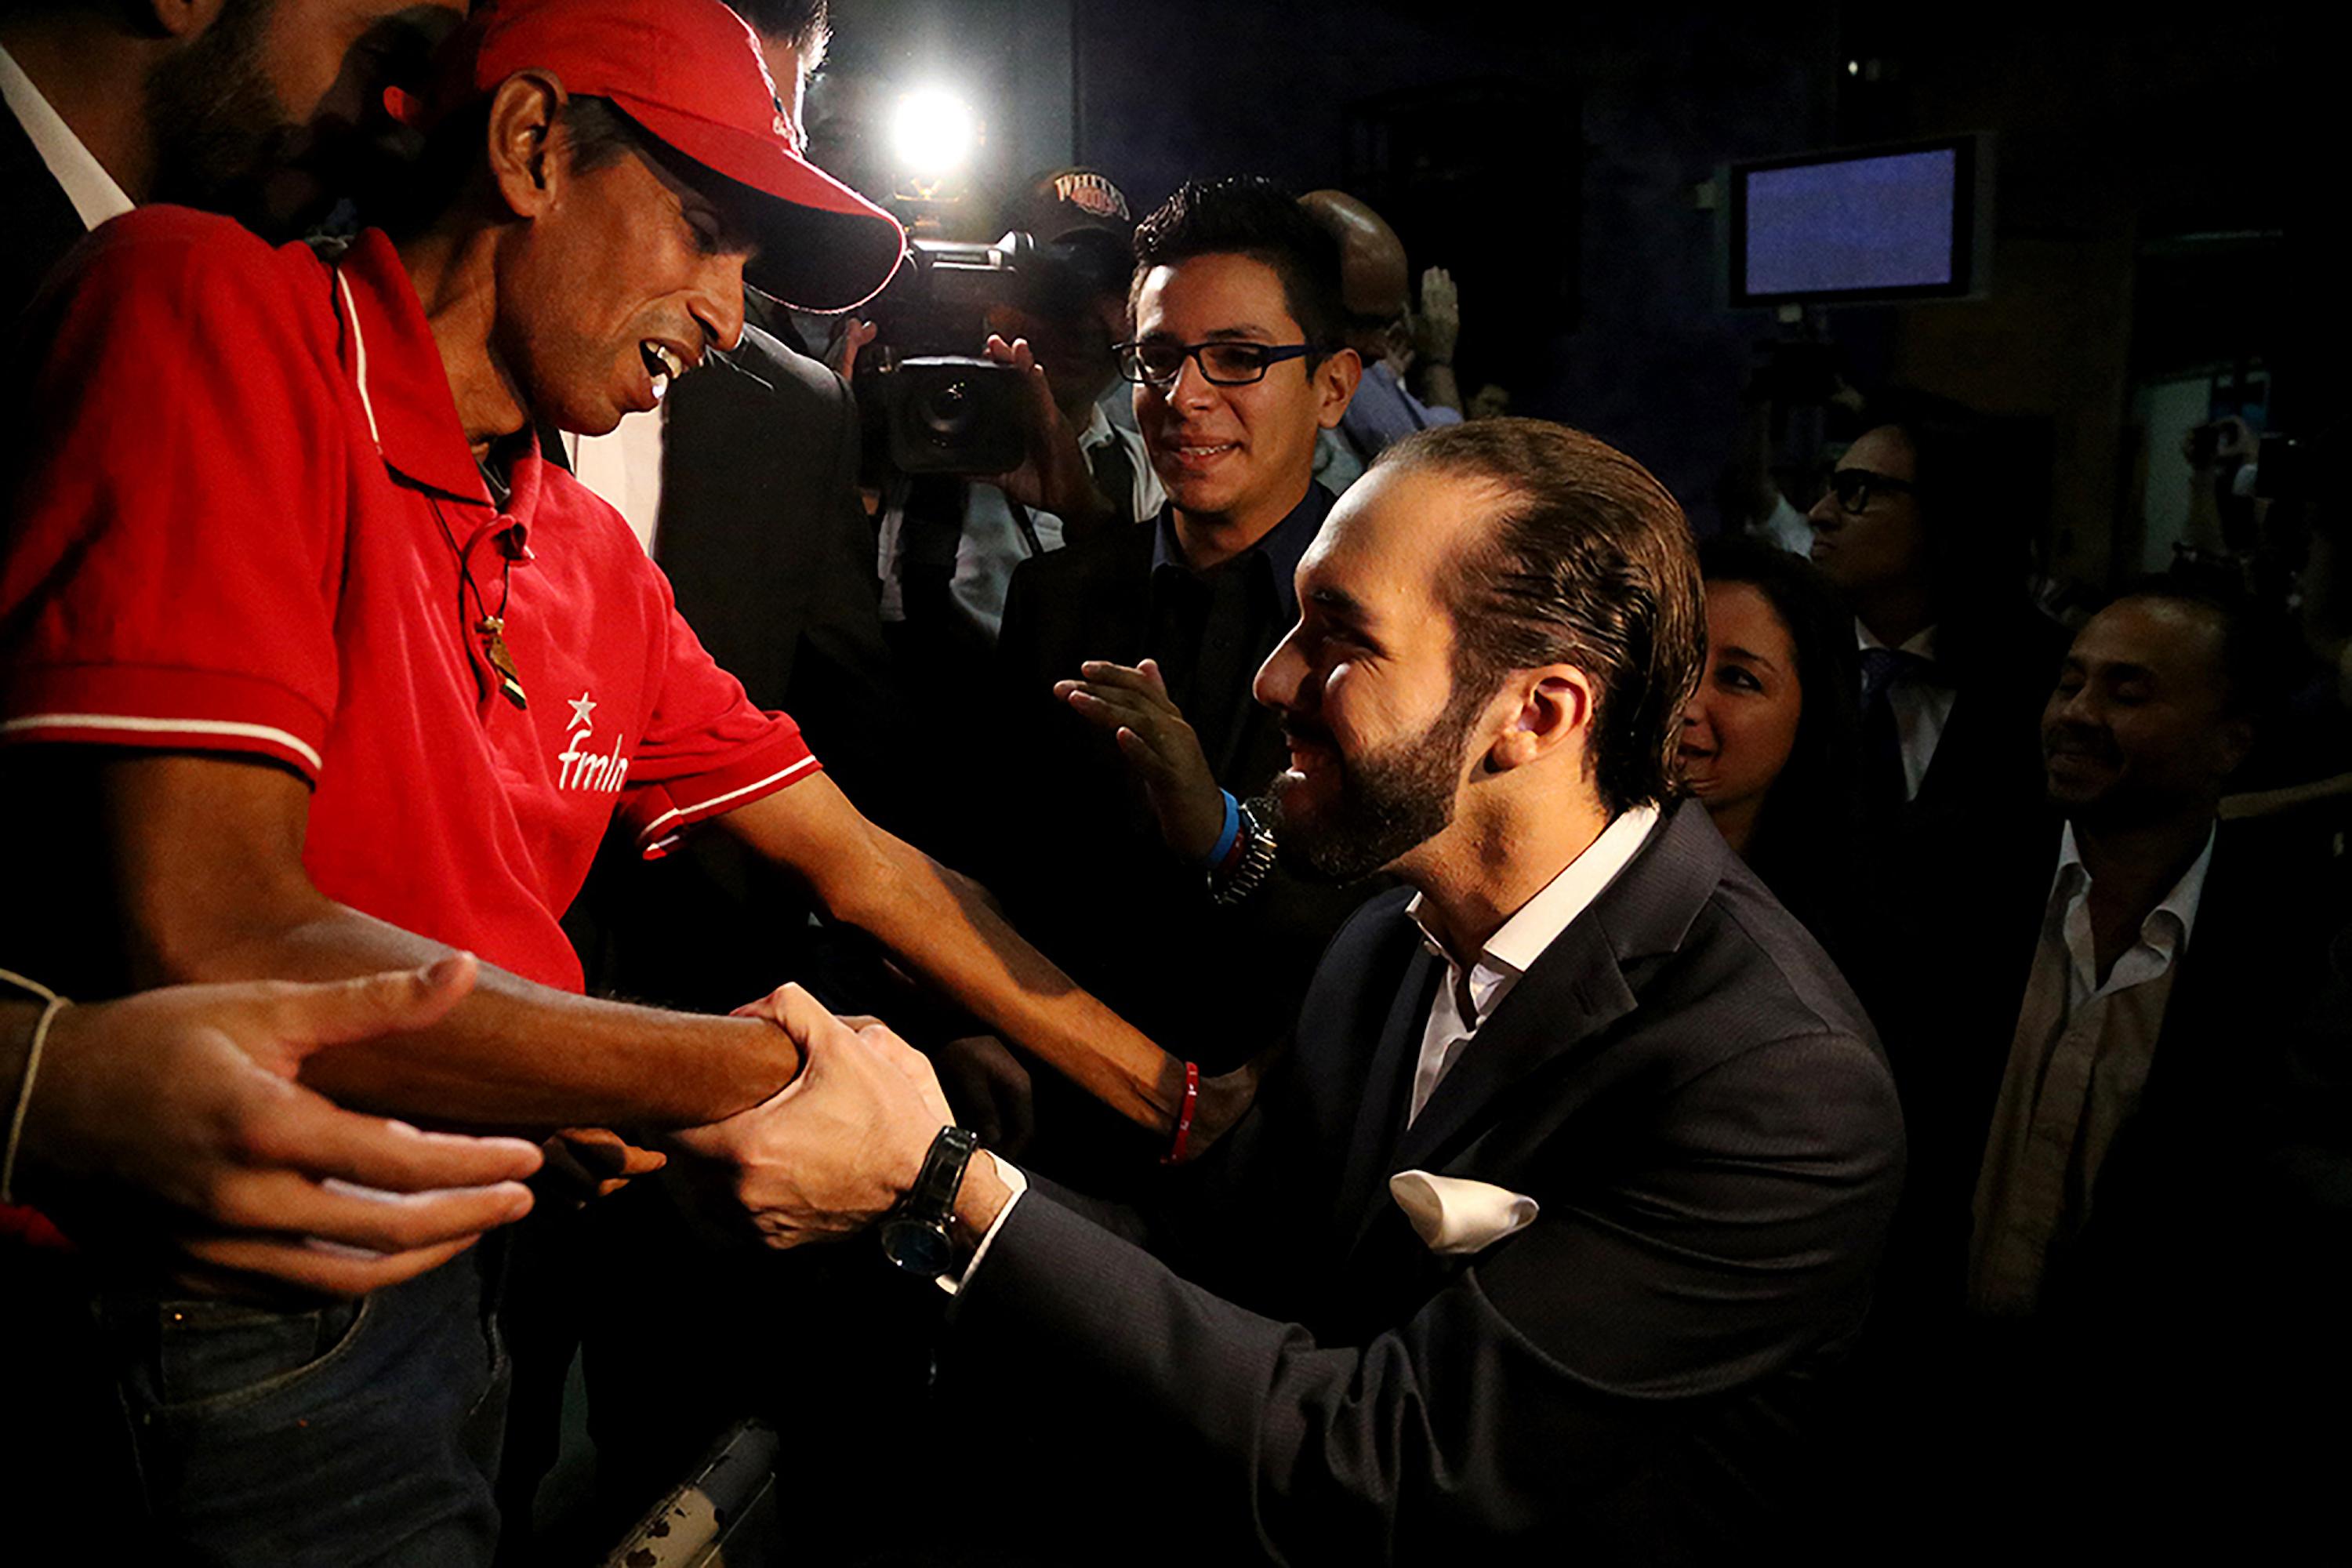 Nayib Bukele greets an FMLN party member at the end of an electoral debate during the San Salvador mayor